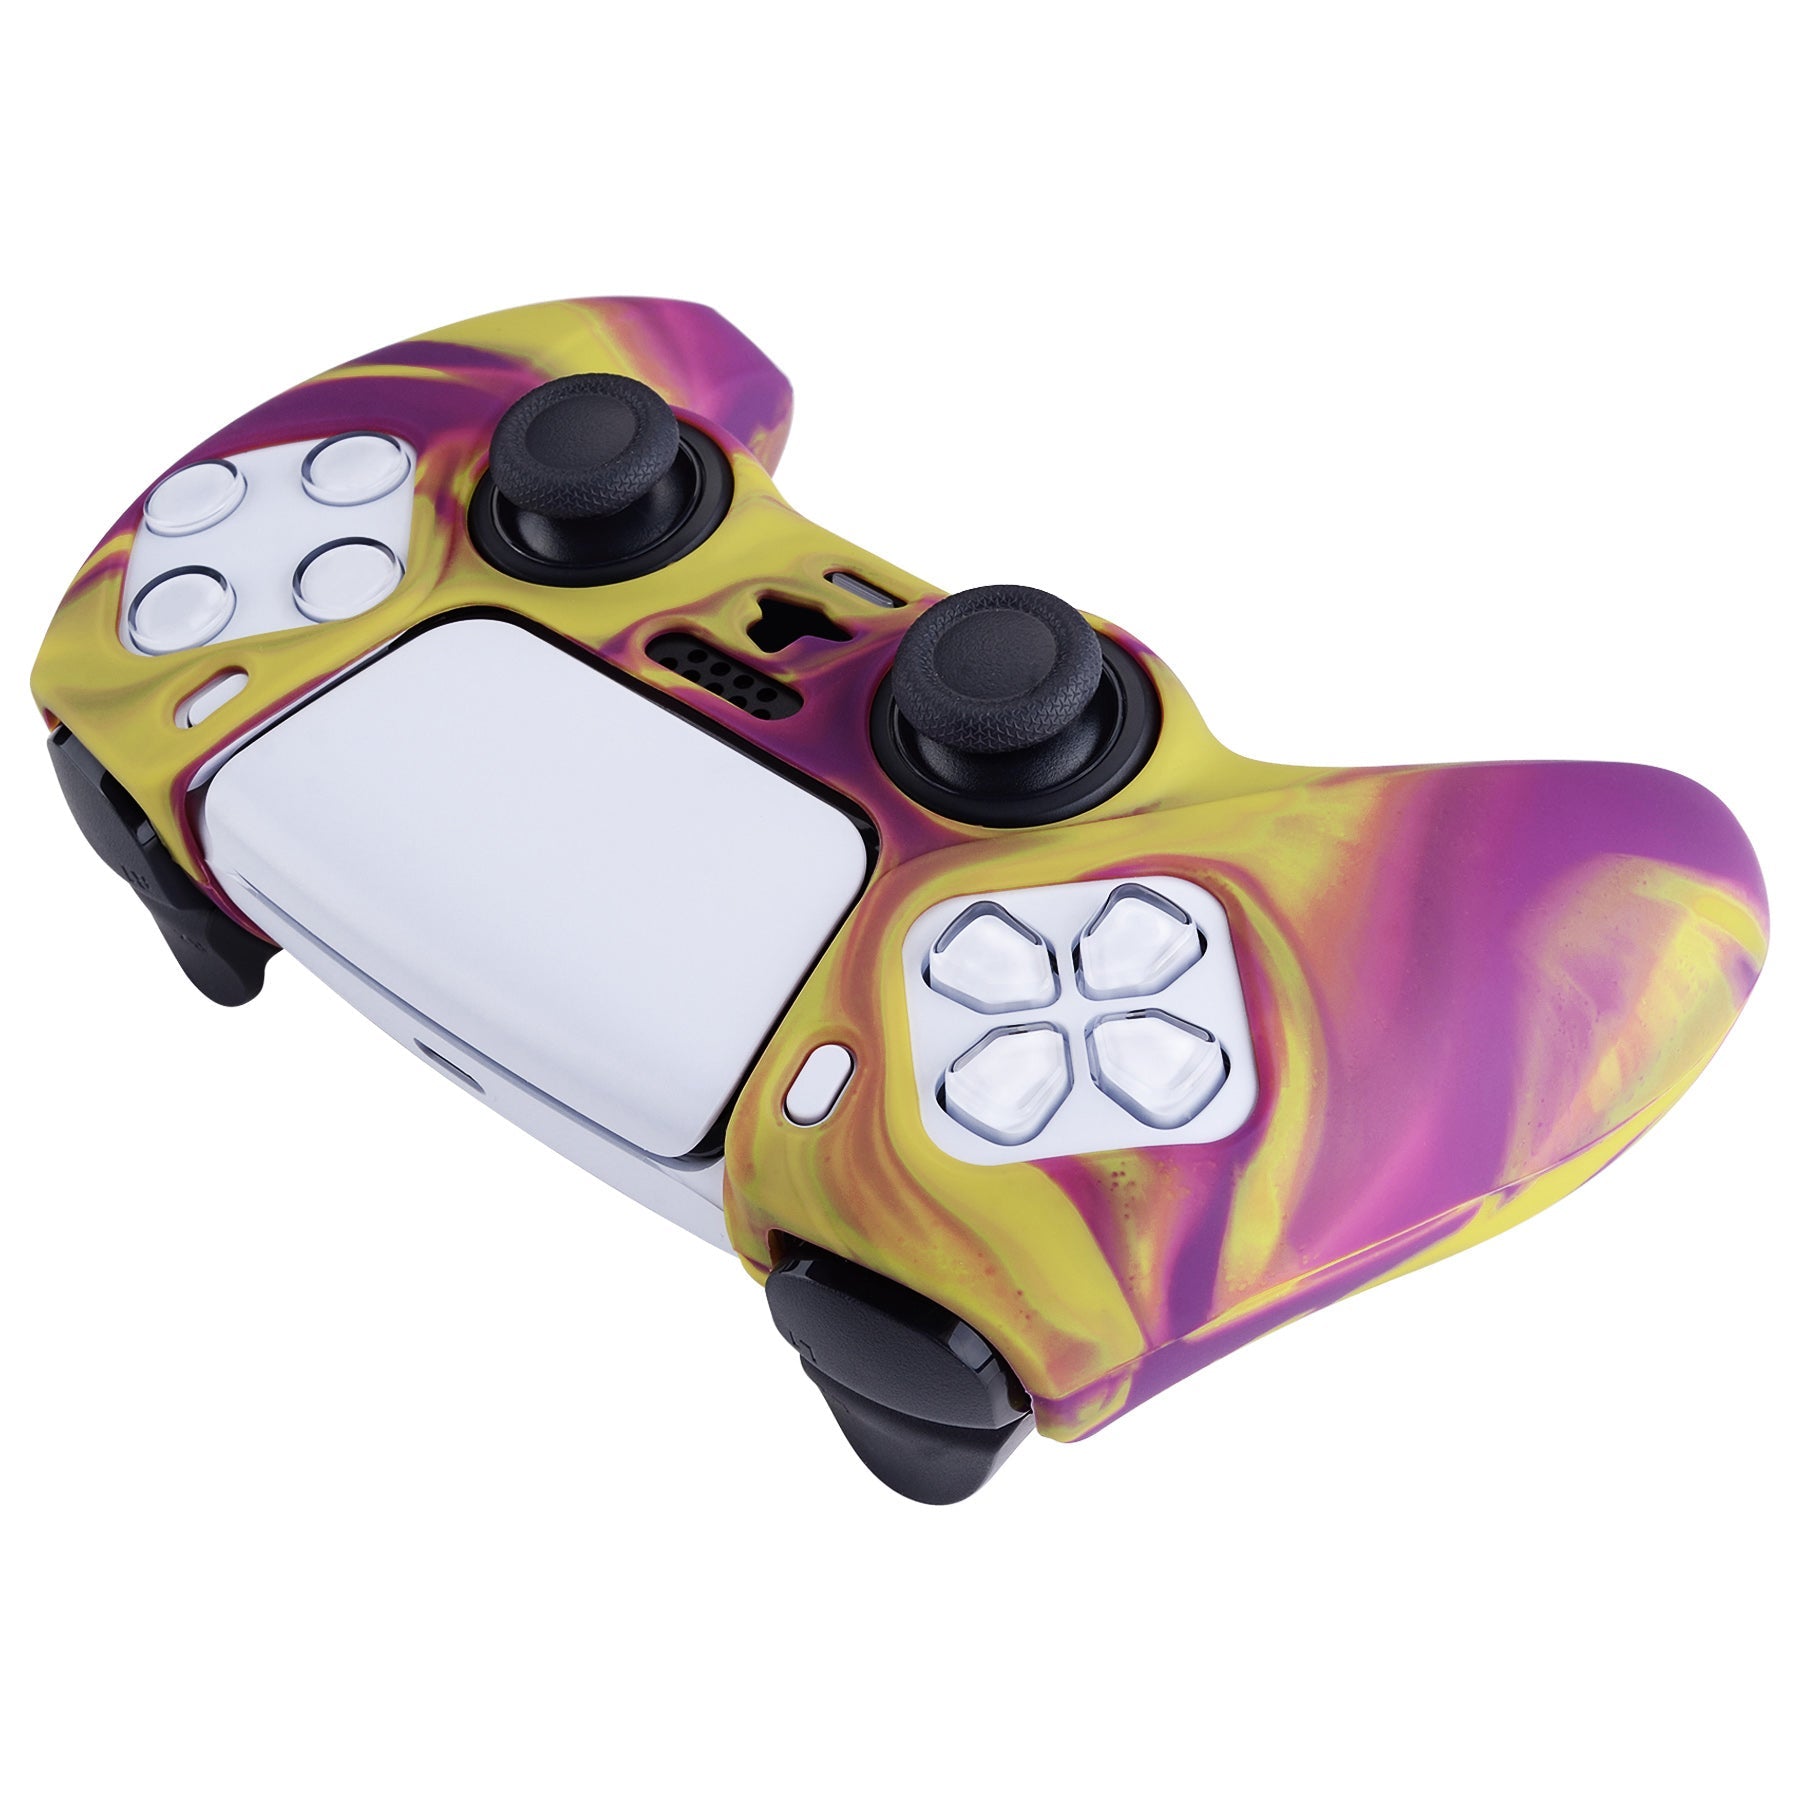 PlayVital Two Tone Purple & Yellow Camouflage Anti-Slip Silicone Cover Skin for Playstation 5 Controller, Soft Rubber Case for PS5 Controller with Black Thumb Grip Caps - KOPF013 PlayVital